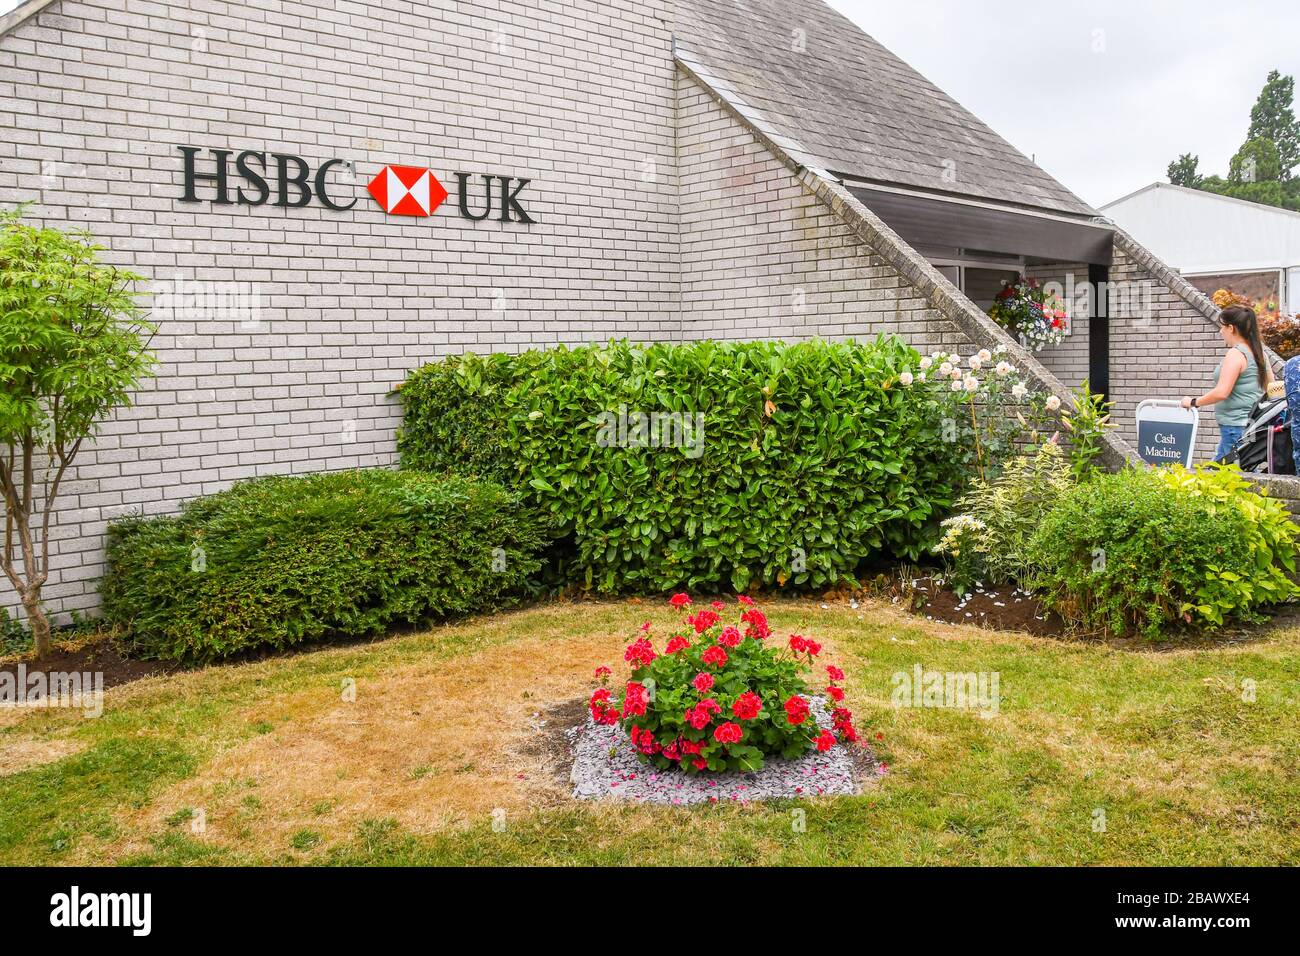 BUILTH WELLS, WALES - JULY 2018: Exterior of the branch of the HSBC Bank on the Royal Welsh Showground in Builth Wells. Stock Photo